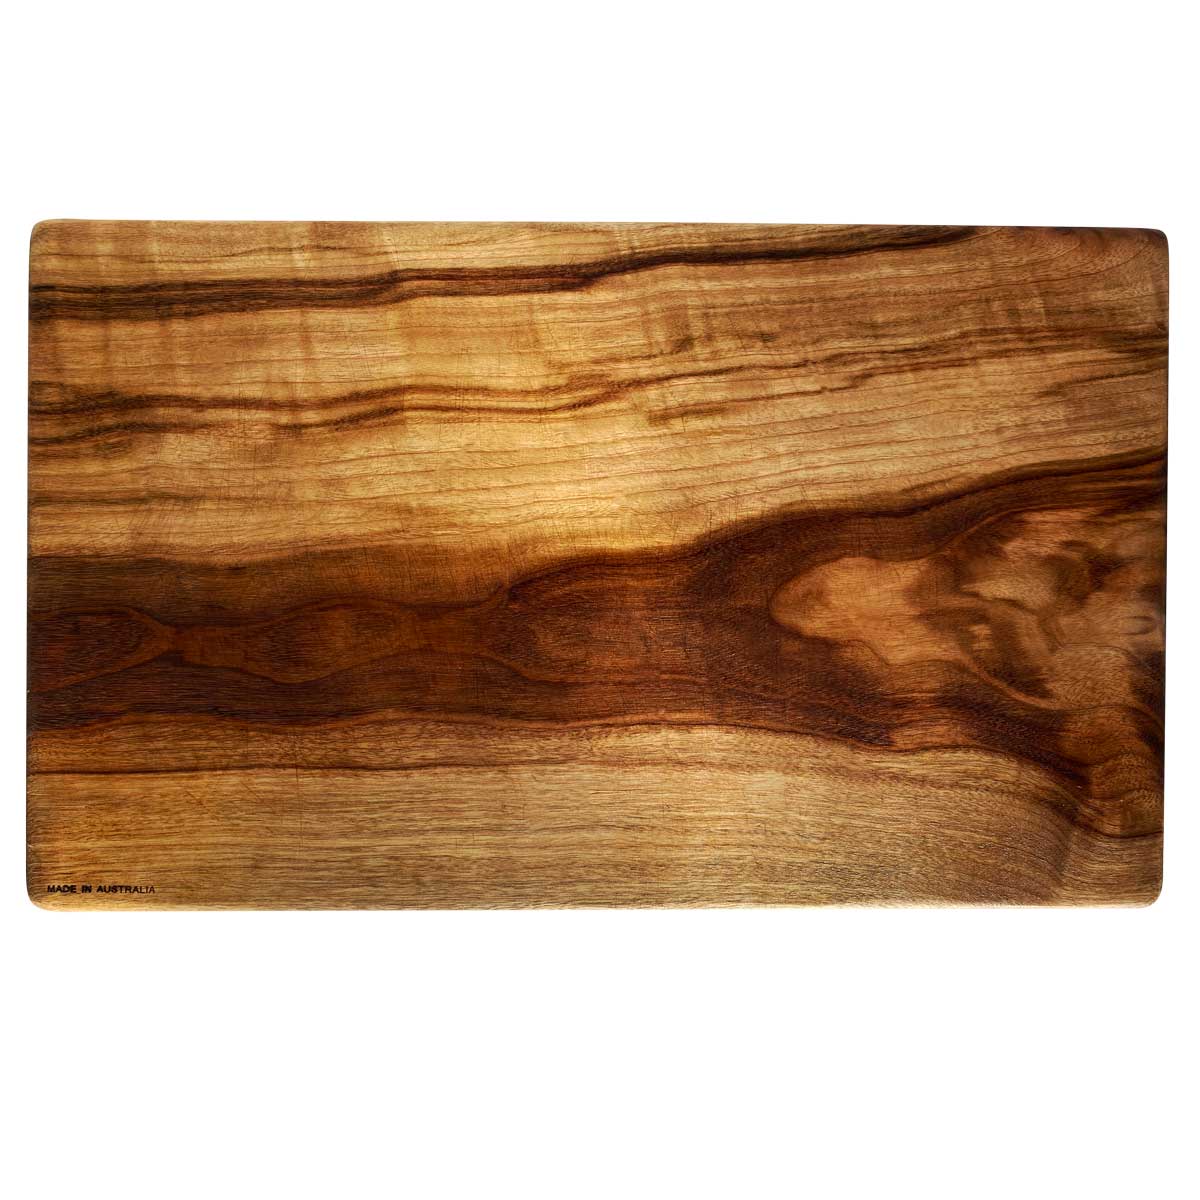 Large rectangular wood cutting and chopping board made from Camphor Laurel by Nature's Boards, in Australia